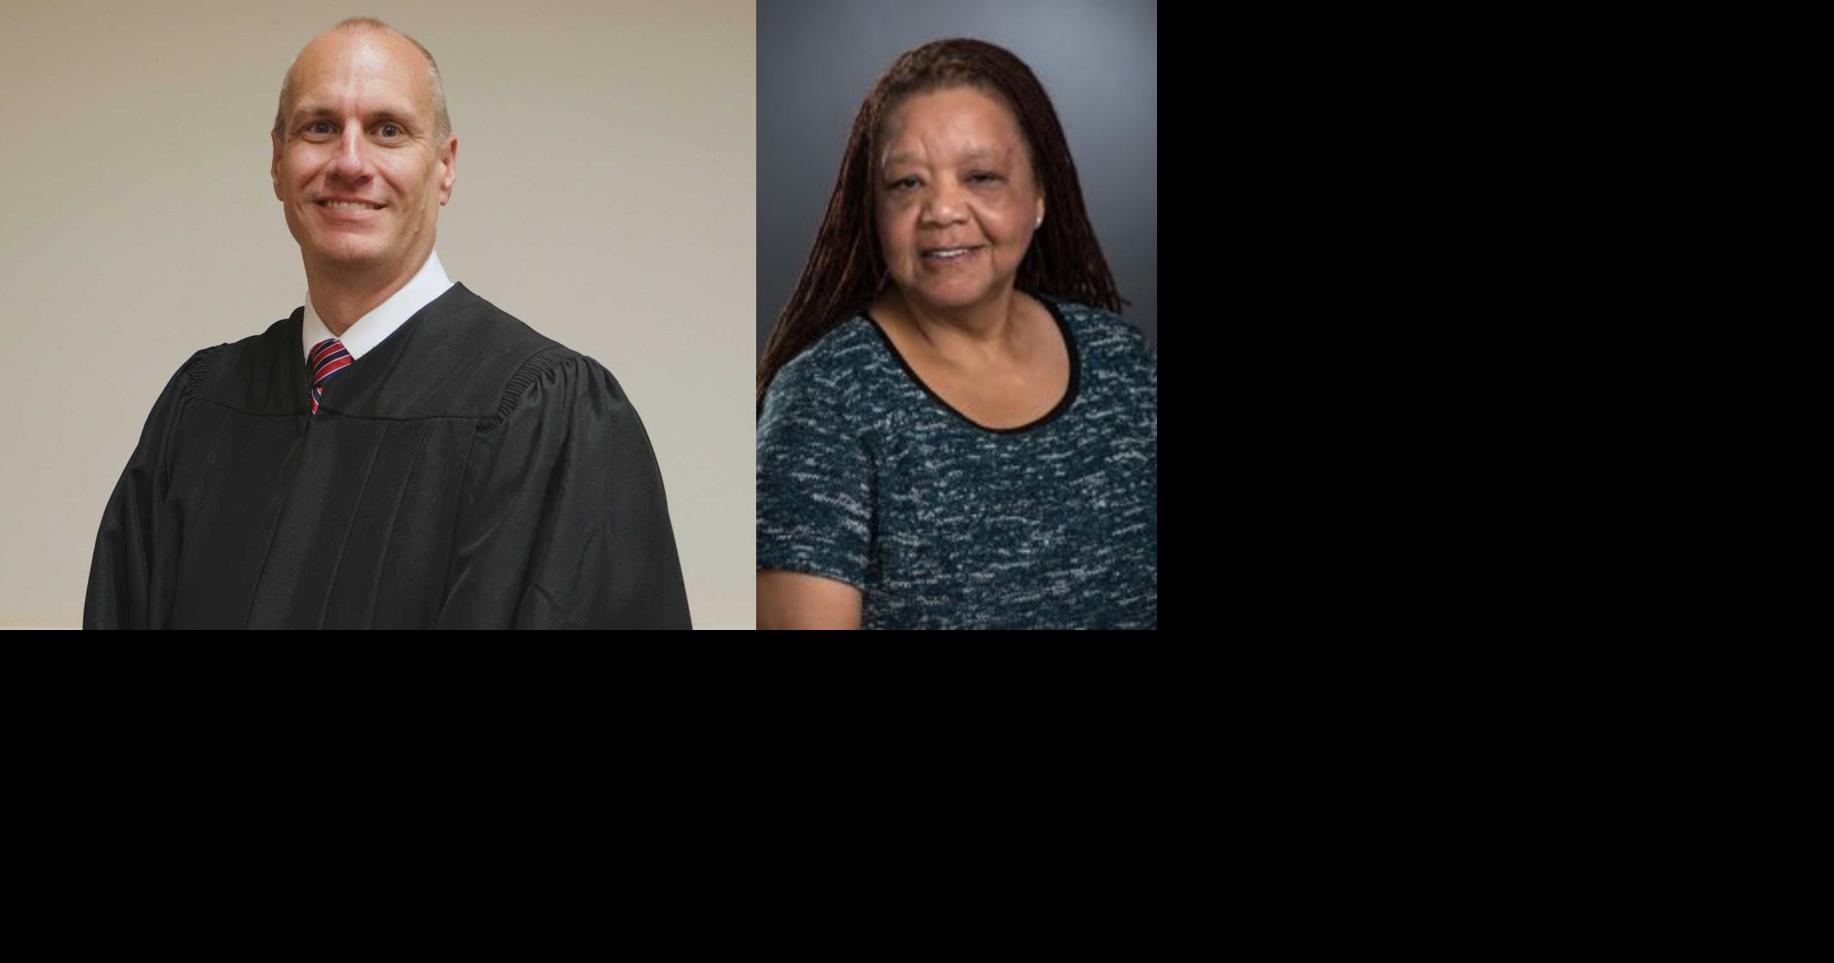 Voters pick Judge Rowe for Superior Court seat News